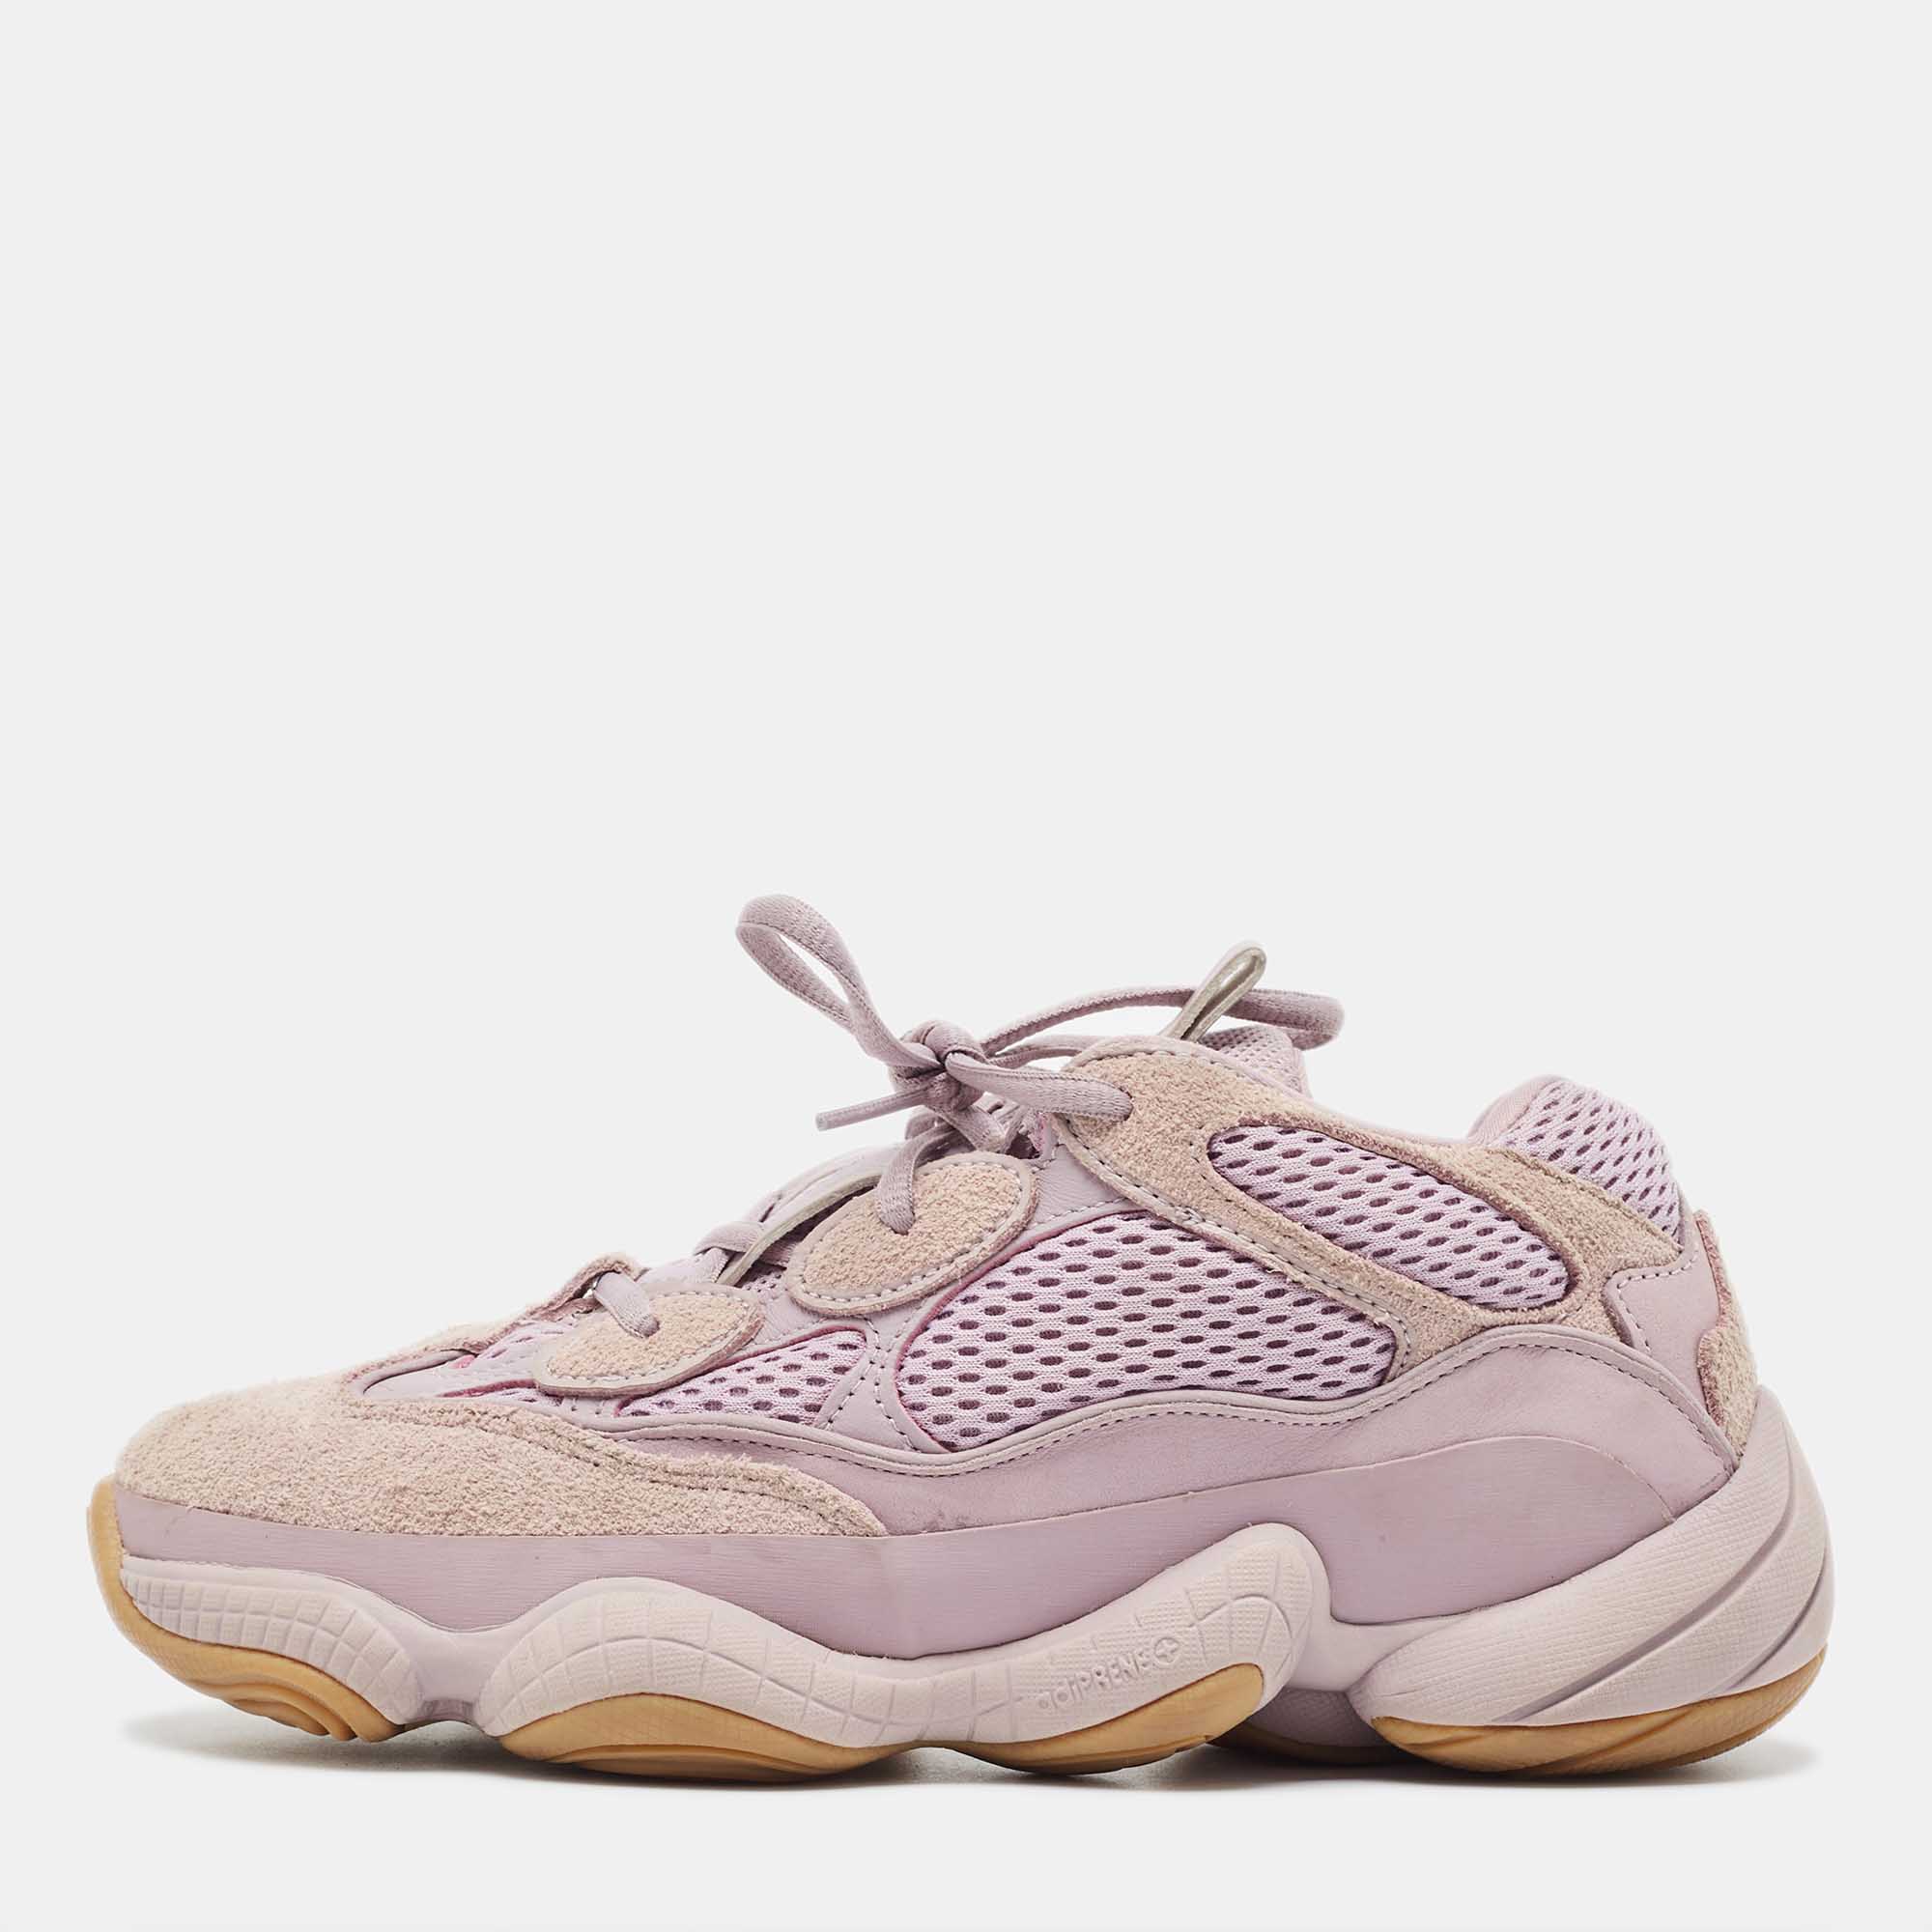 Yeezy x adidas adidas x yeezy purple mesh and suede boost yeezy 500 soft vision sneakers size 39.5